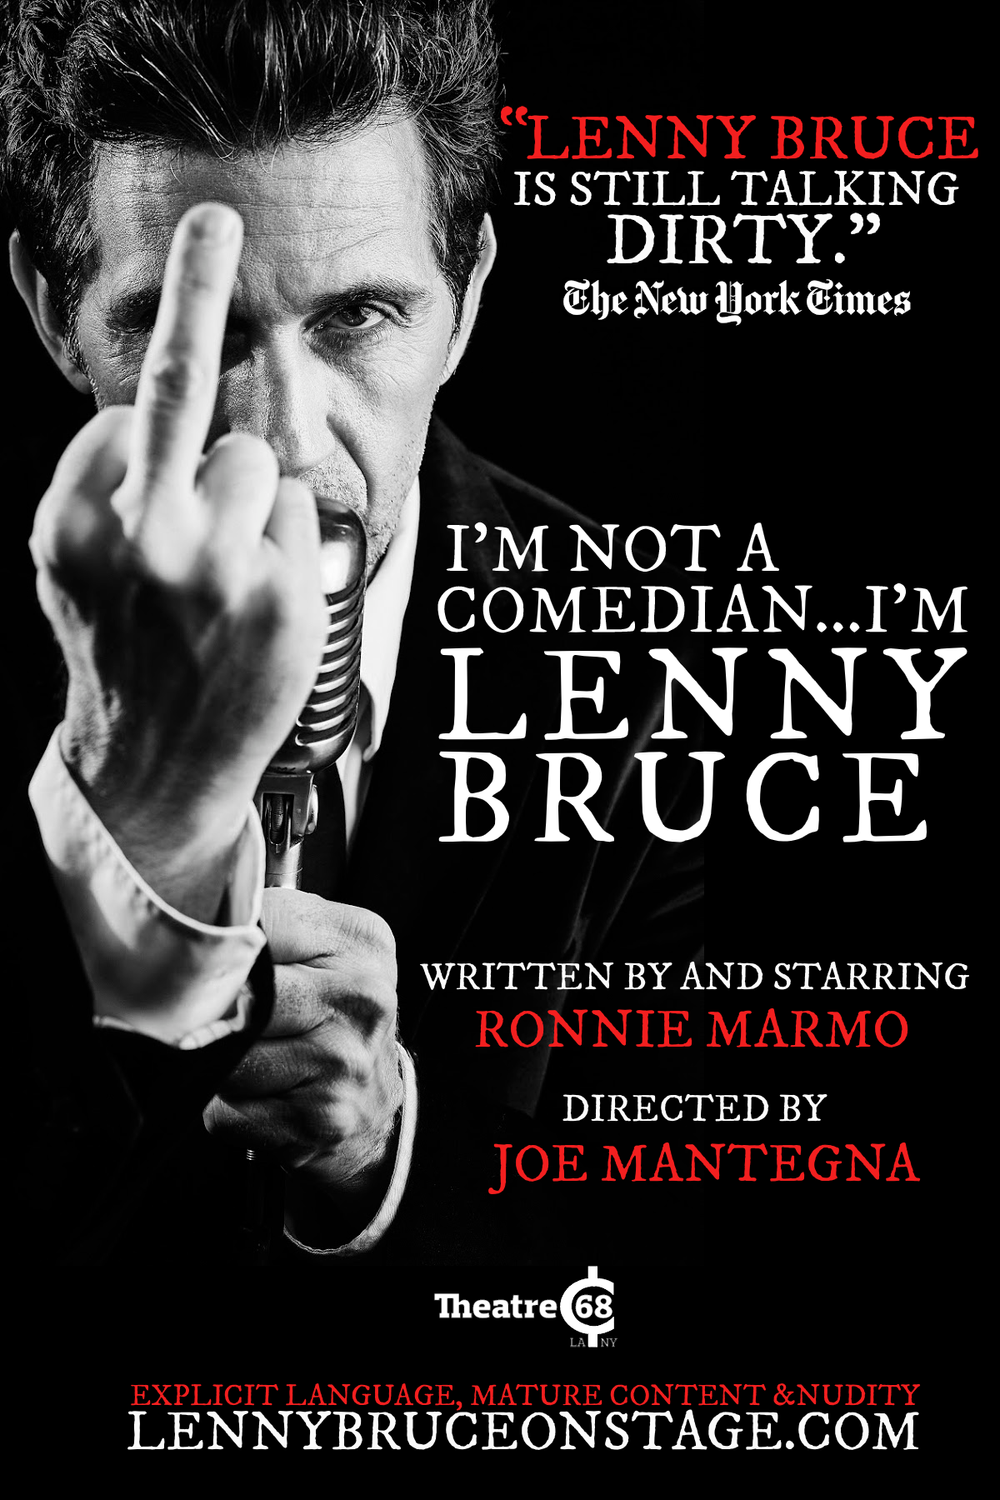 I'M NOT A COMEDIAN...I'M LENNY BRUCE's NoHo Arts theater review.  Starring Ronnie Marmo at the Theater 68 Arts Complex in the NoHo Arts District.